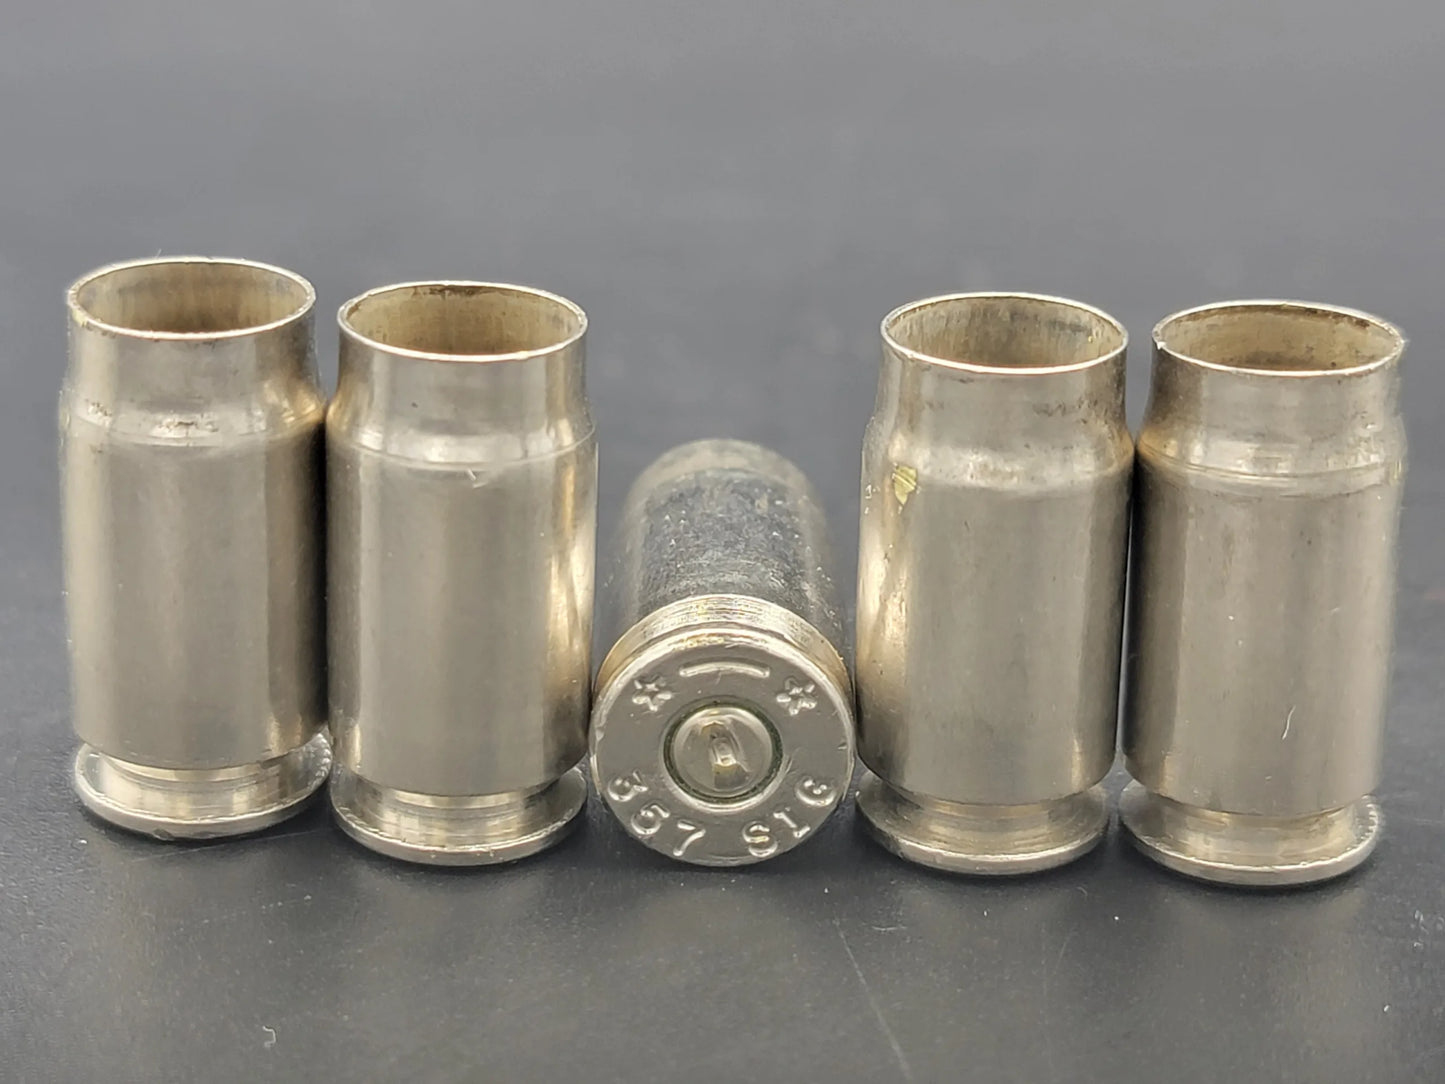 357 Sig once fired pistol nickel. Hand sorted from reputable indoor/military ranges for reloading. Reliable spent casings for precision shooting.